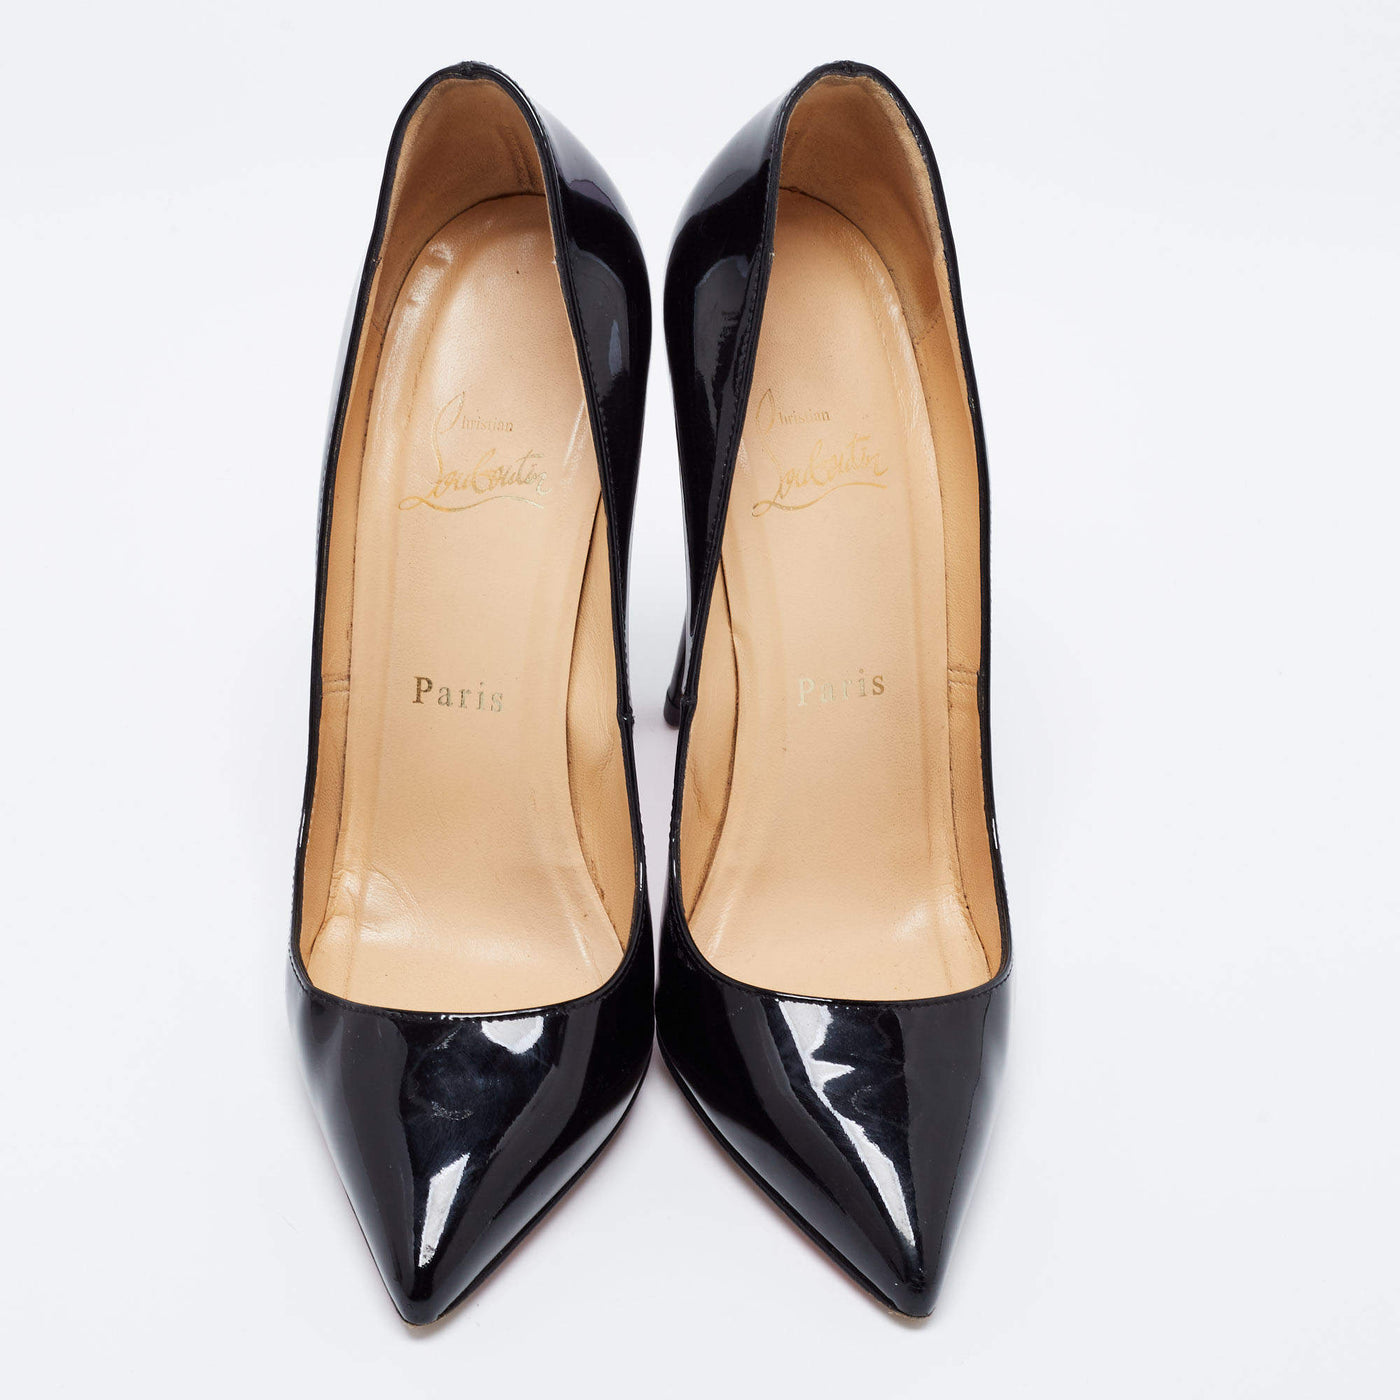 Christian Louboutin Leather Pigalle Patent Calf And Pointed Toe Pumps - Size 5.5